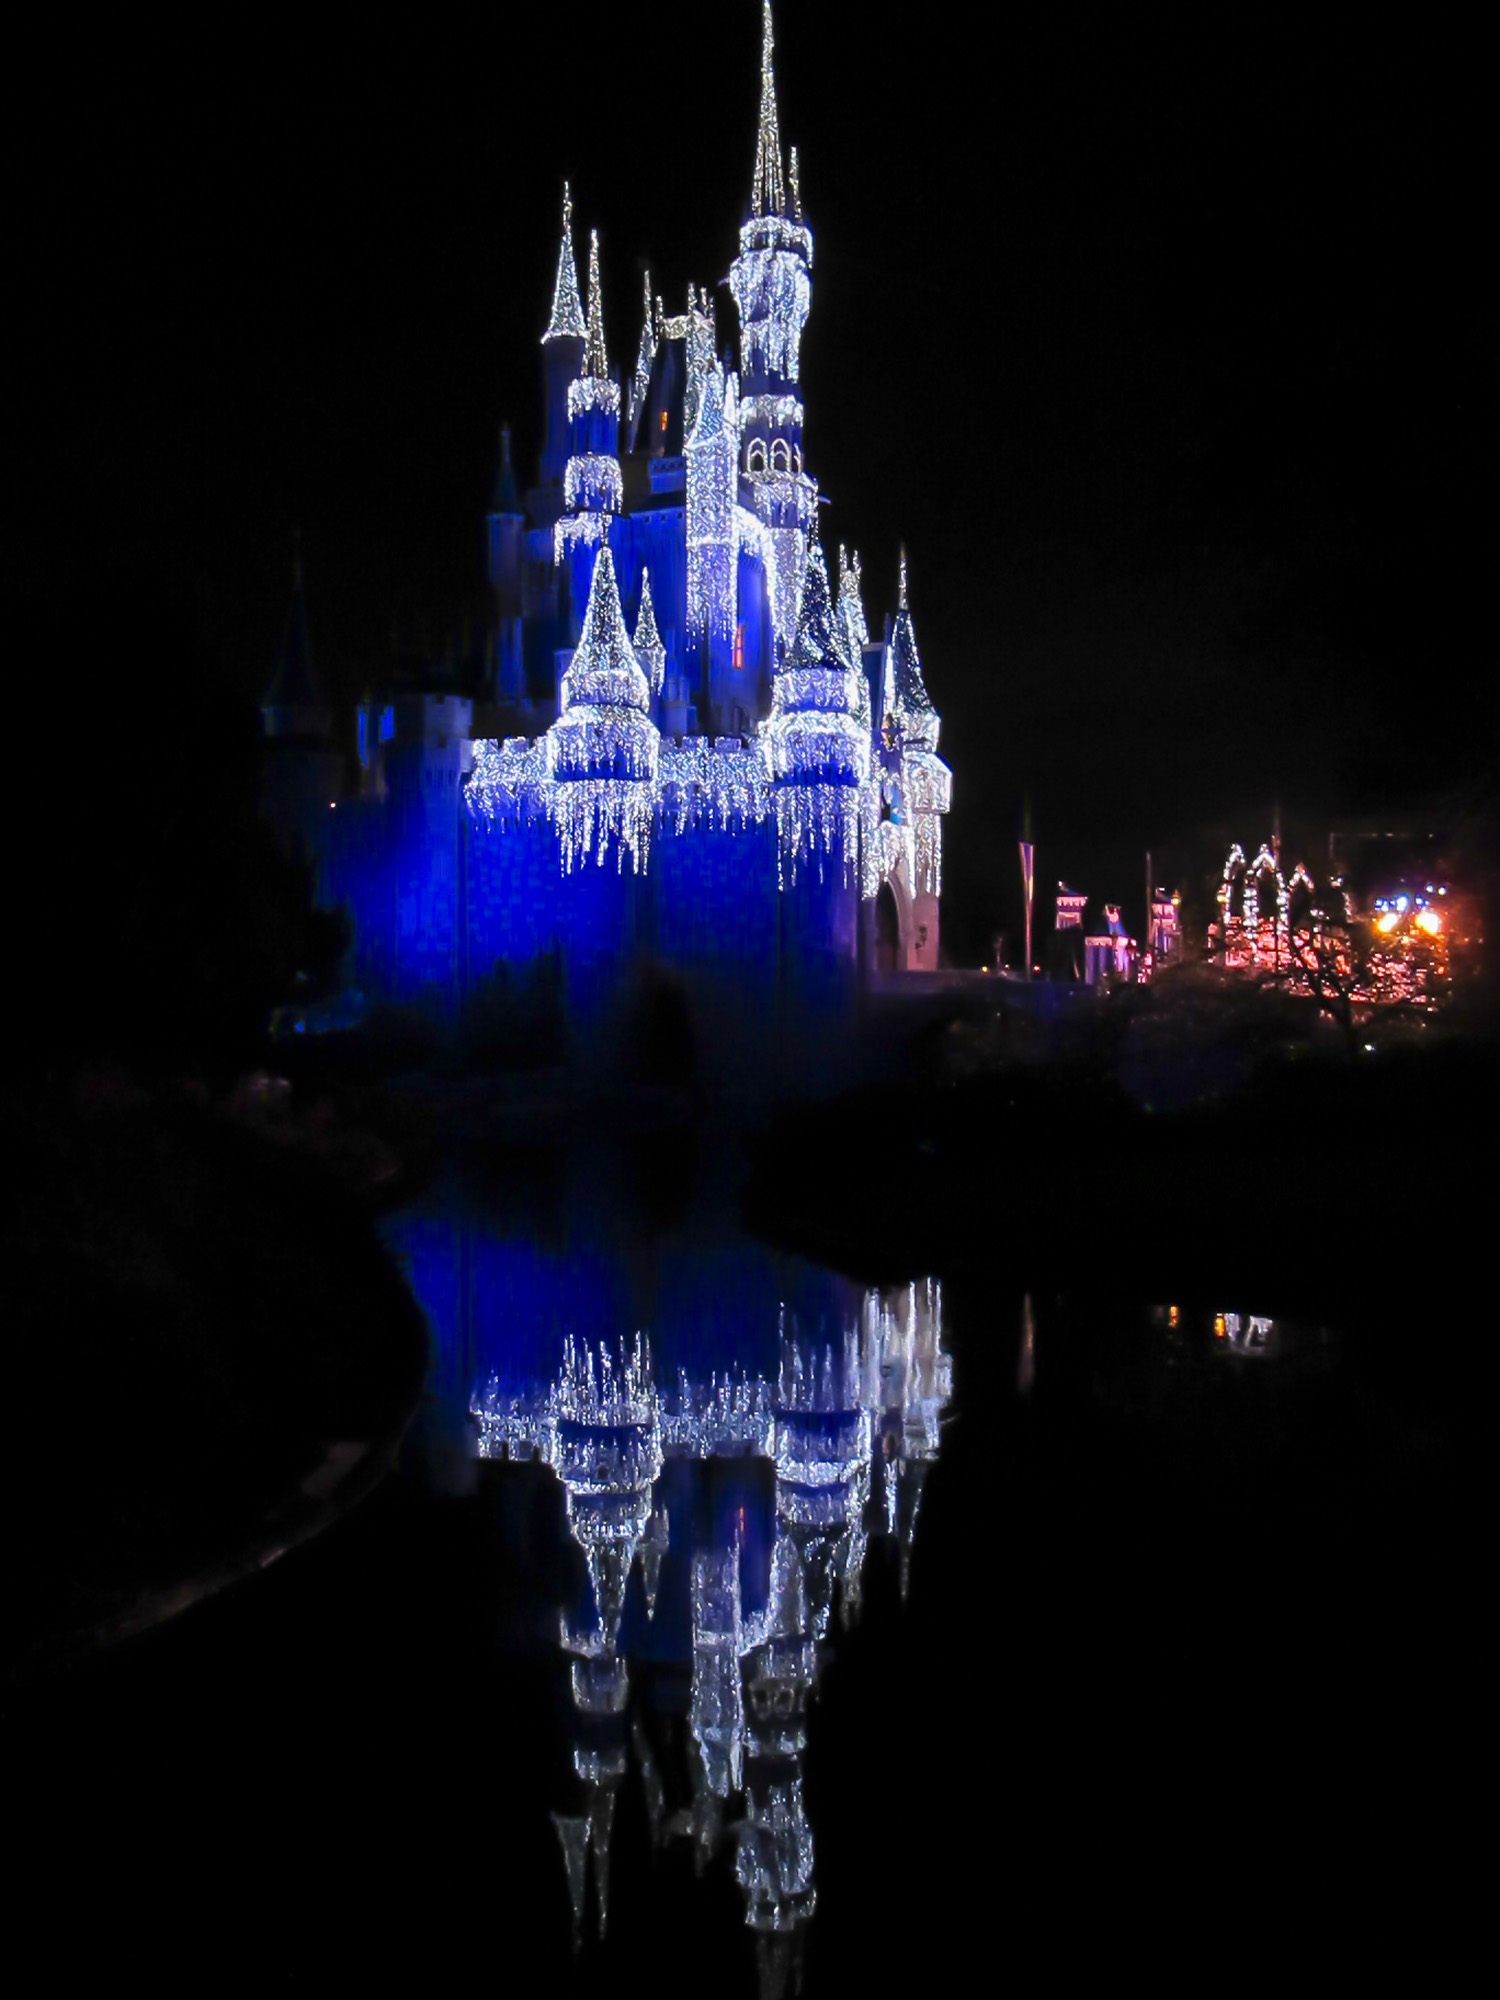 Cinderella's Castle during the holidays